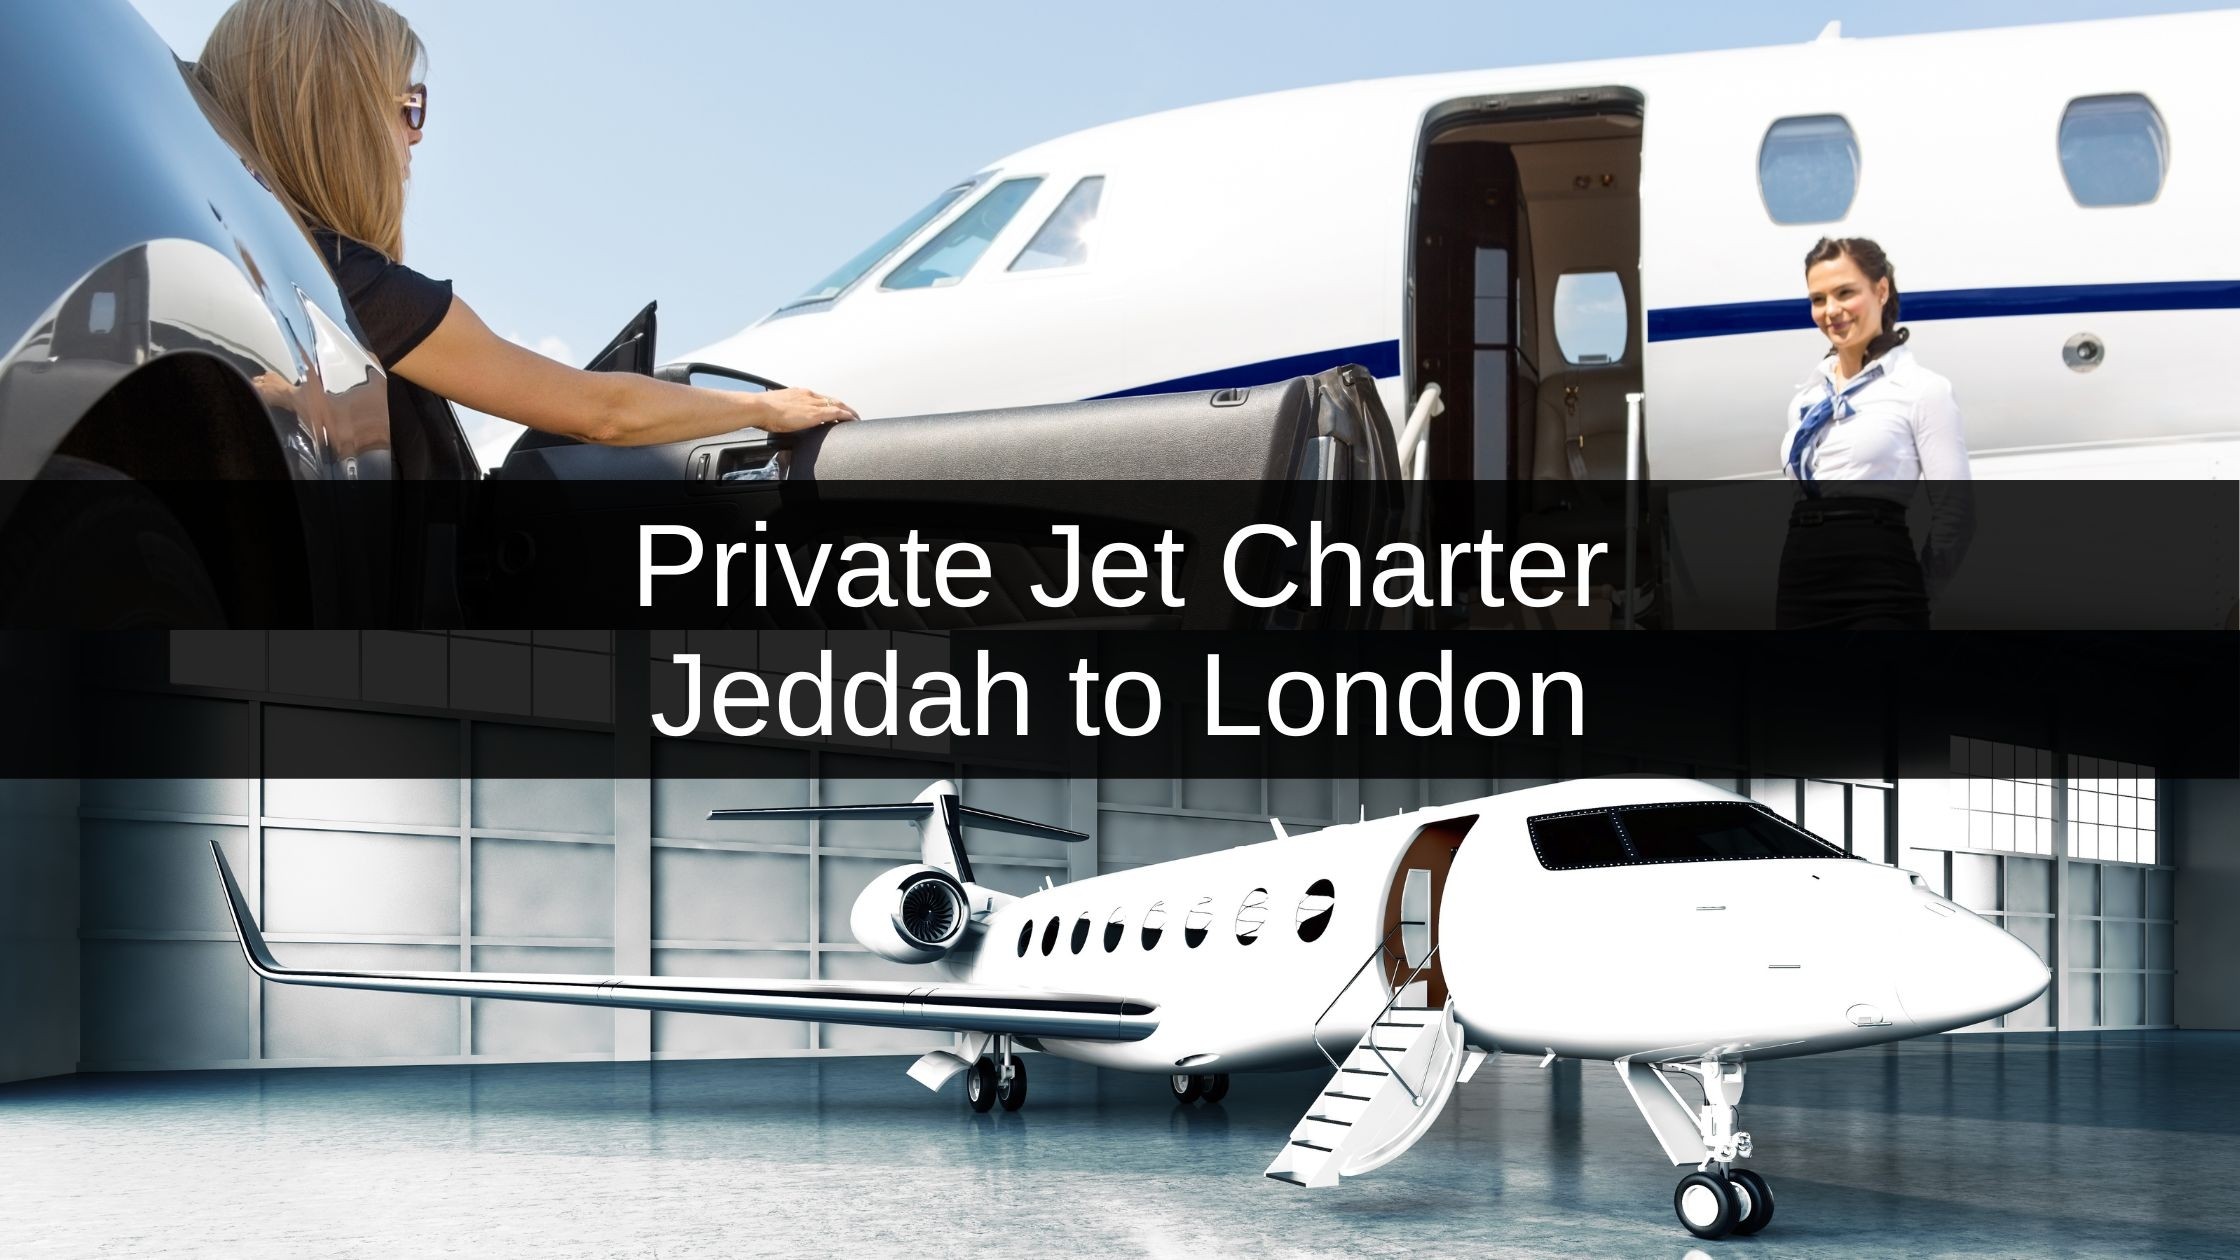 Private Jet Charter from Jeddah to London